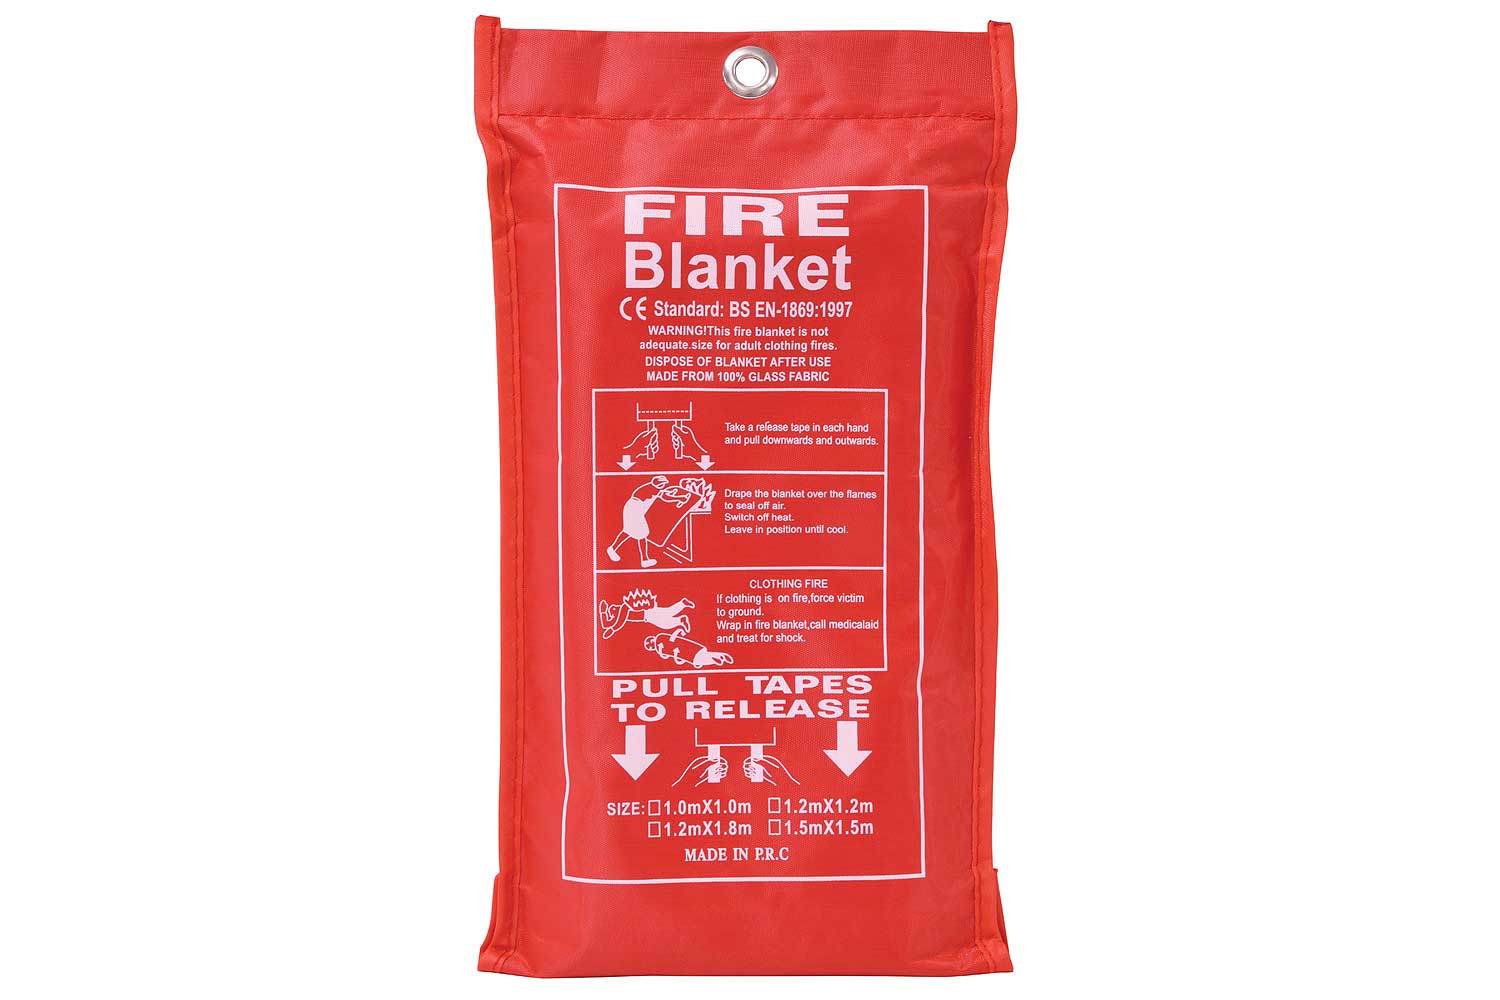 FIRE BLANKET 1M x 1M QUICK RELEASE LARGE SIZE EASY TO HANGE RED COVER UK STOCK 